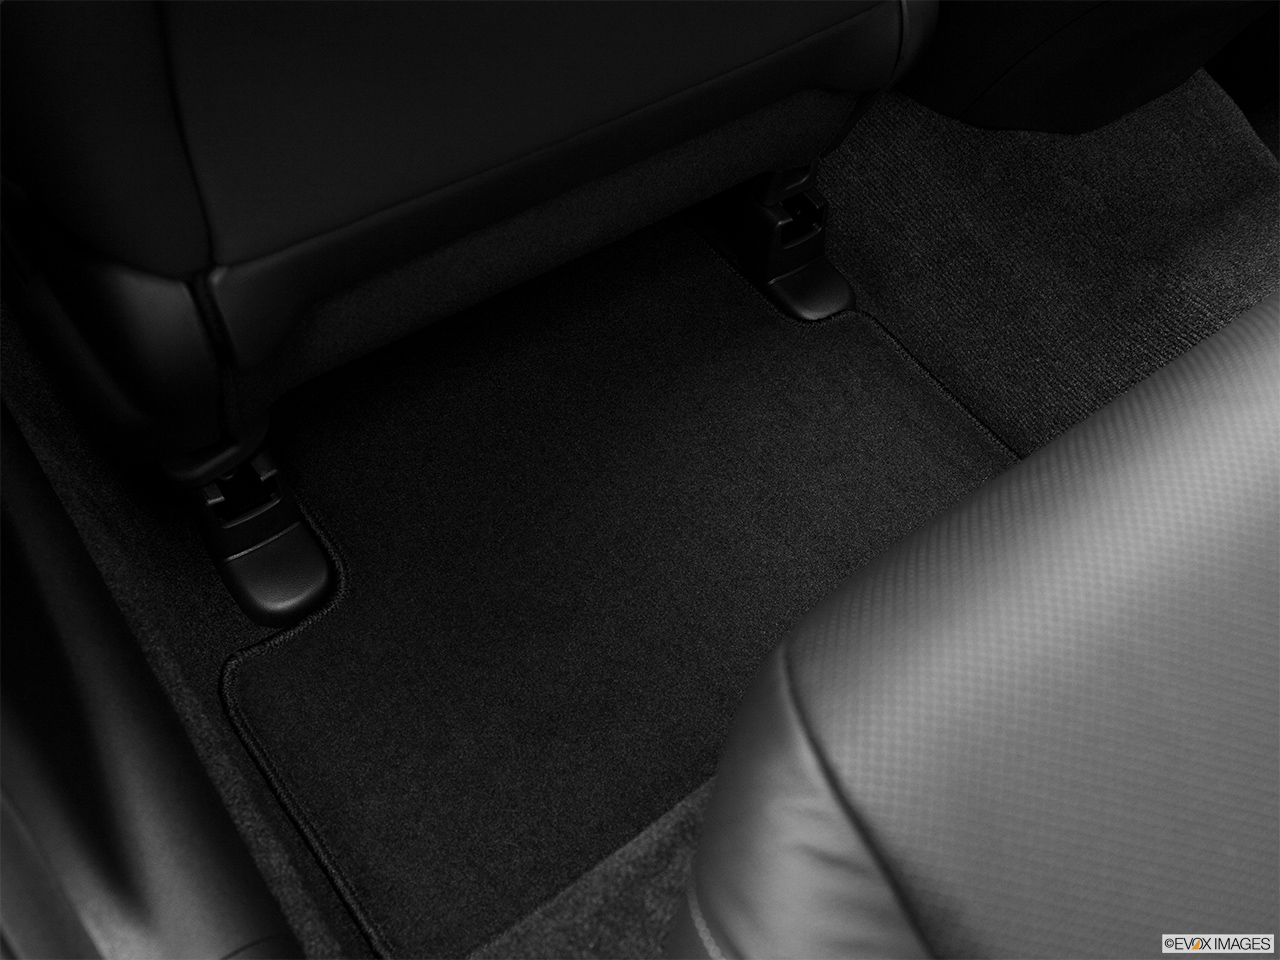 2011 Acura TSX TSX 5-speed Automatic Rear driver's side floor mat. Mid-seat level from outside looking in. 